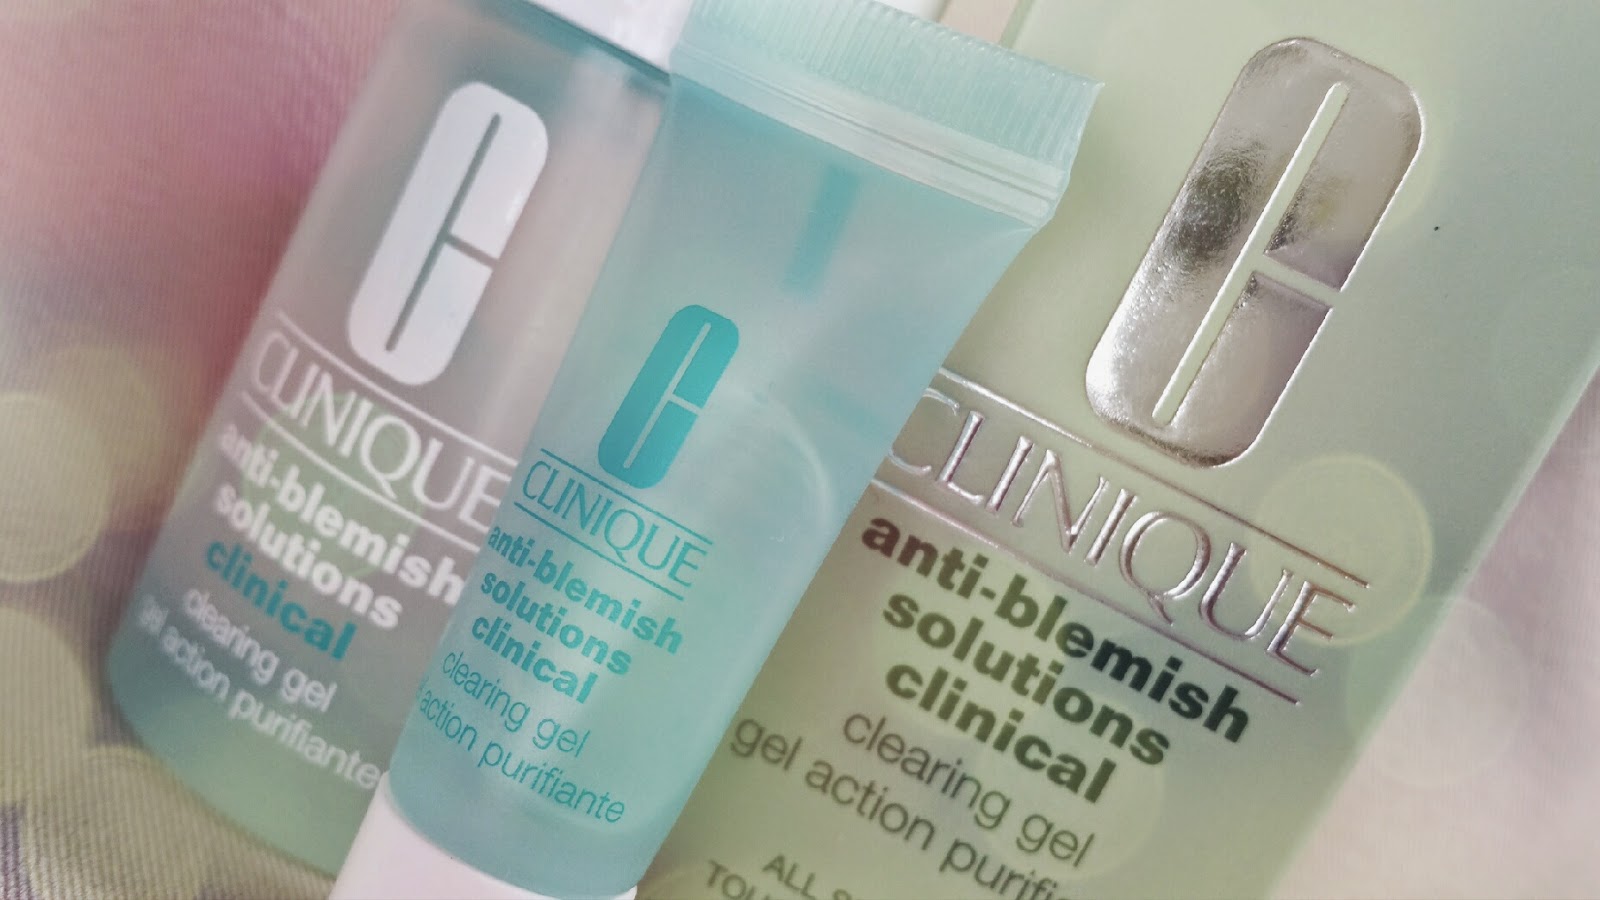 Clinique Anti-Blemish Clinical Clearing Gel